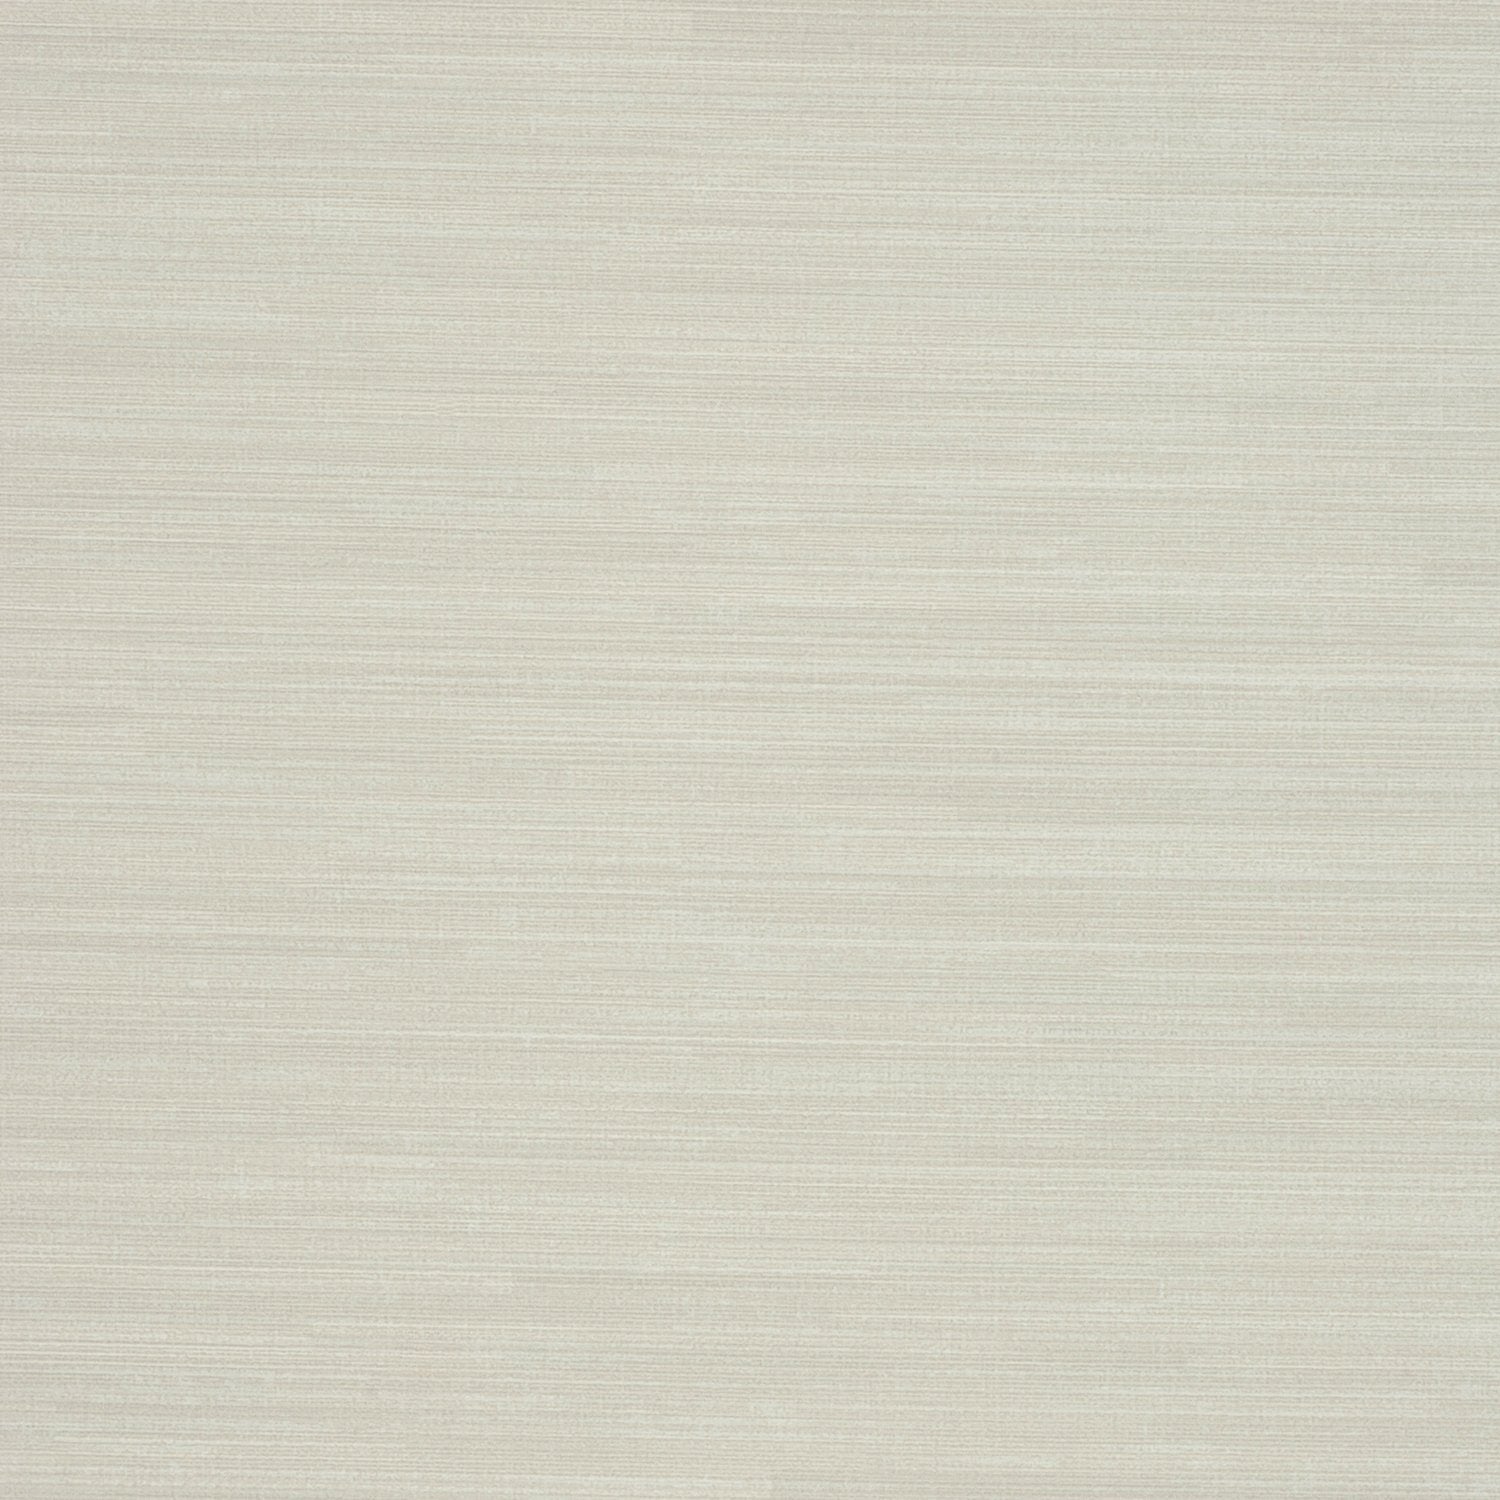 Casbah Silk - Y46479 - Wallcovering - Vycon - Kube Contract